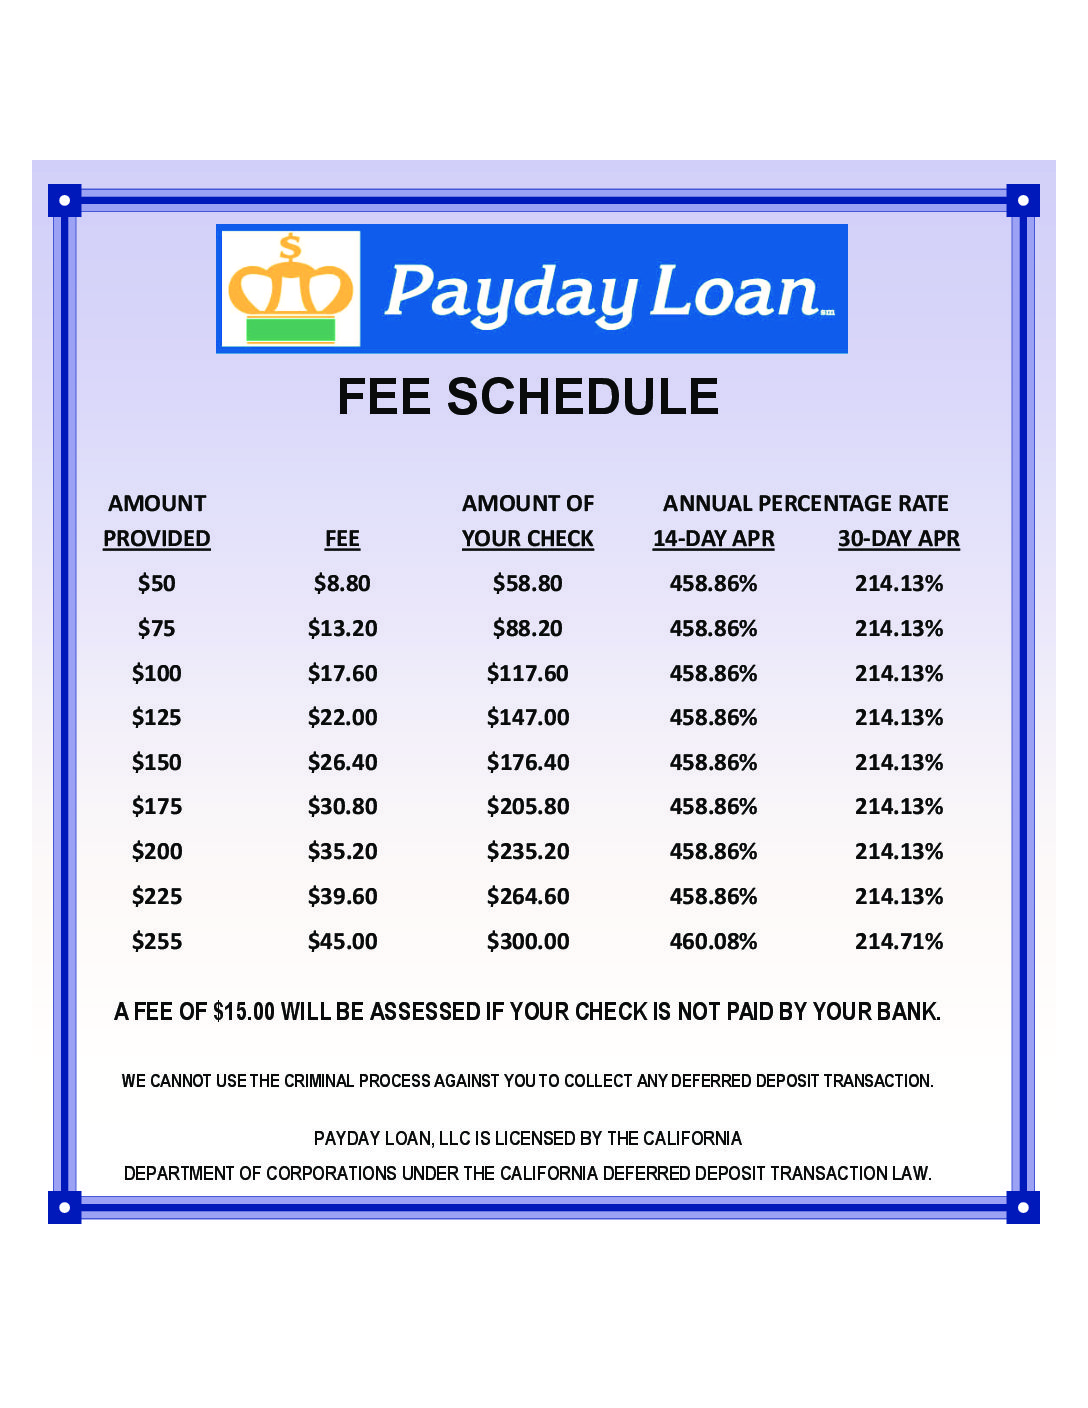 7 Ways To Keep Your Online Payday Lenders Growing Without Burning The Midnight Oil